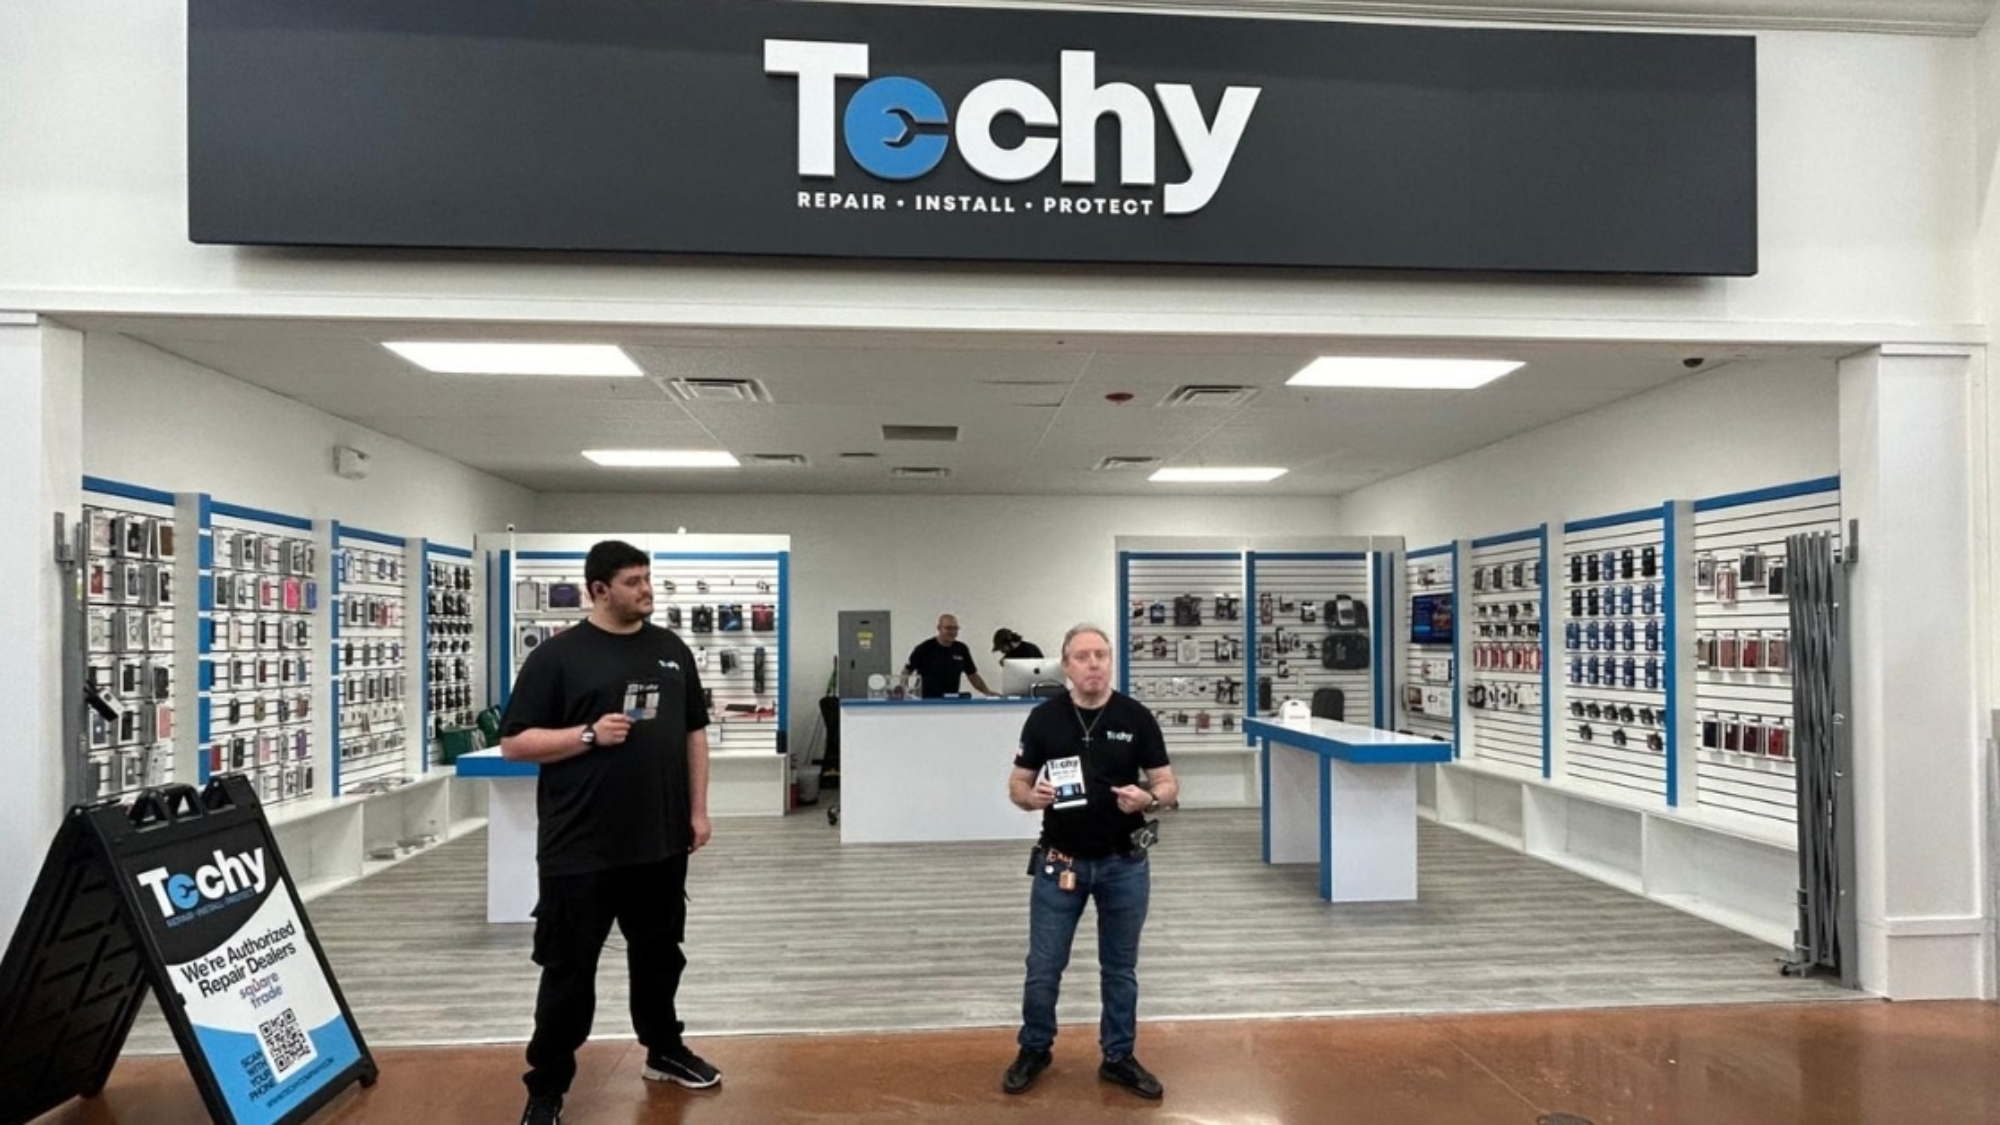 North Port Walmart Welcomes New Techy Store